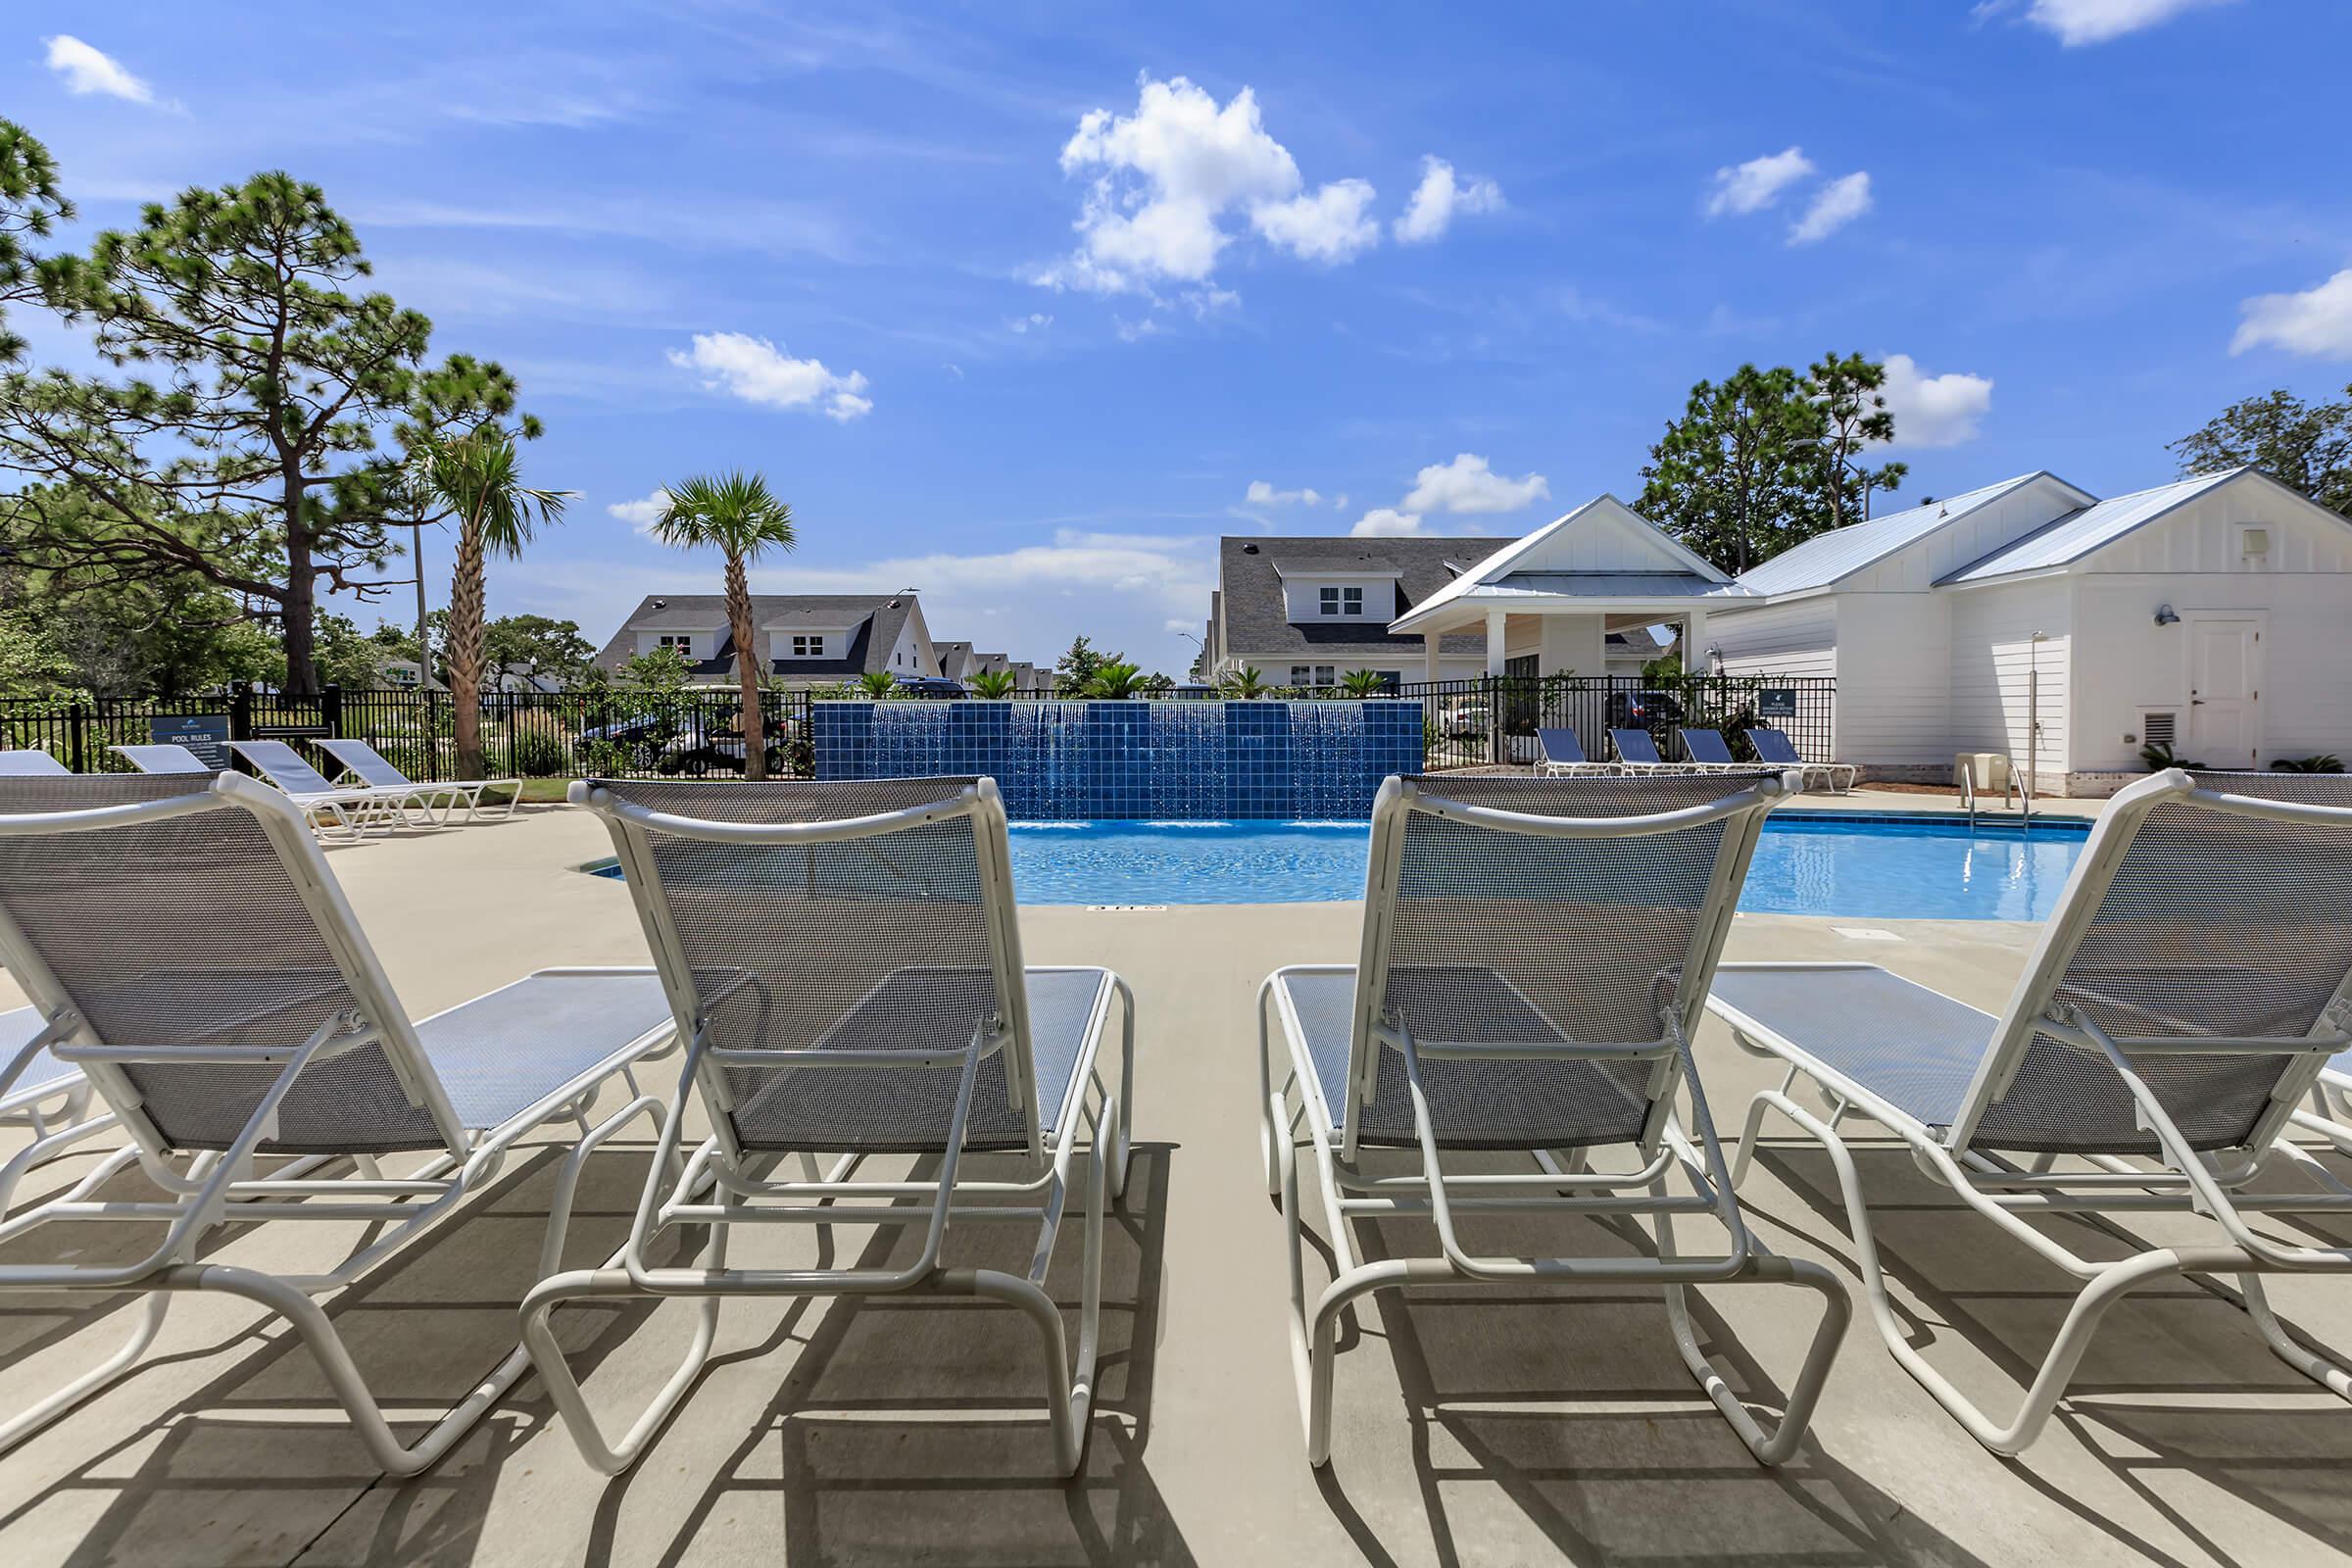 Soak up the sun by the swimming pool at The Townhomes at Beau Rivage in Wilmington, North Carolina.